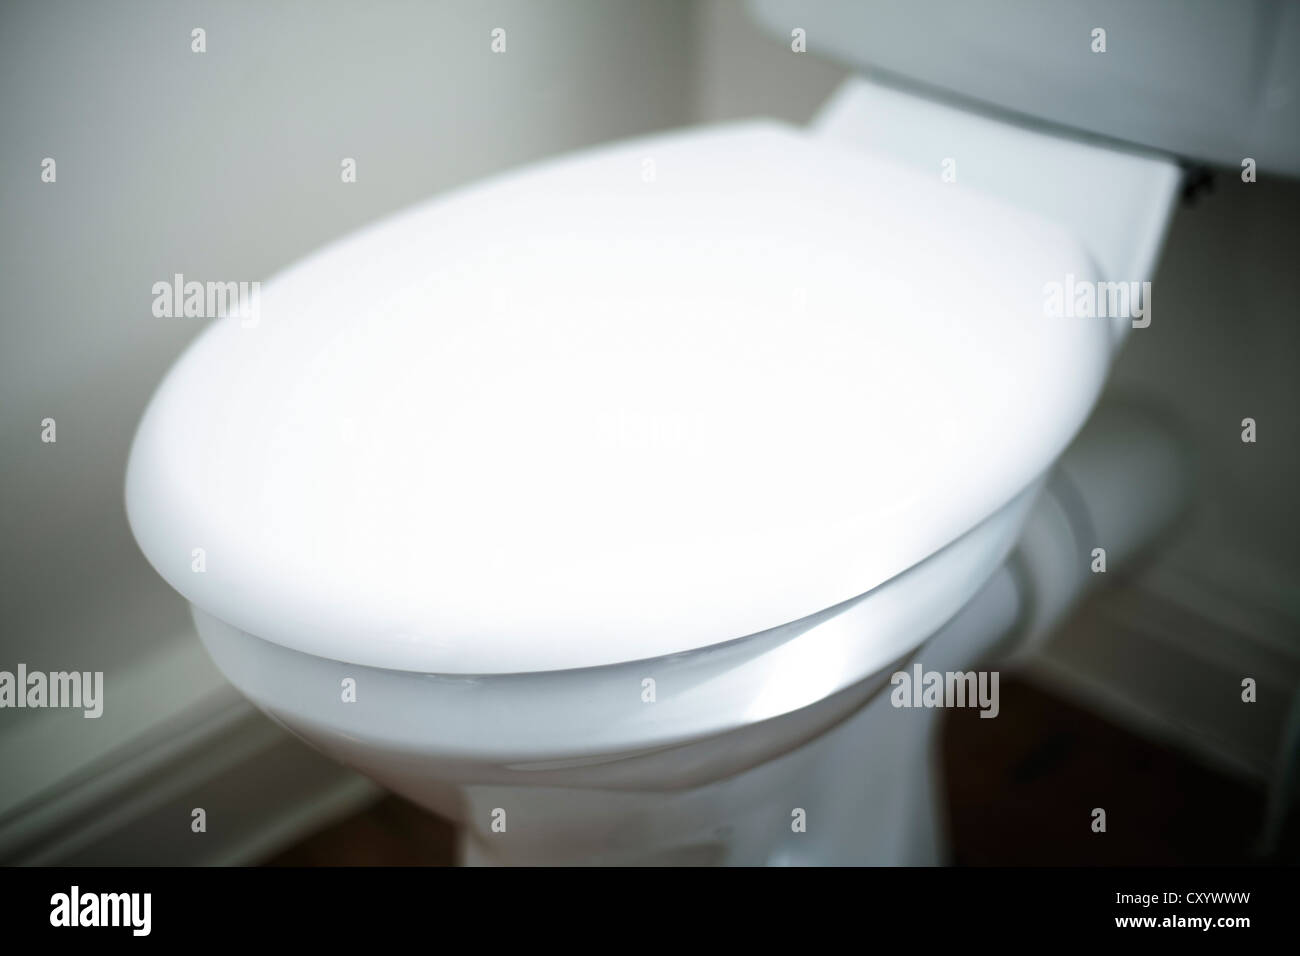 Toilet and seat in shallow focus Stock Photo